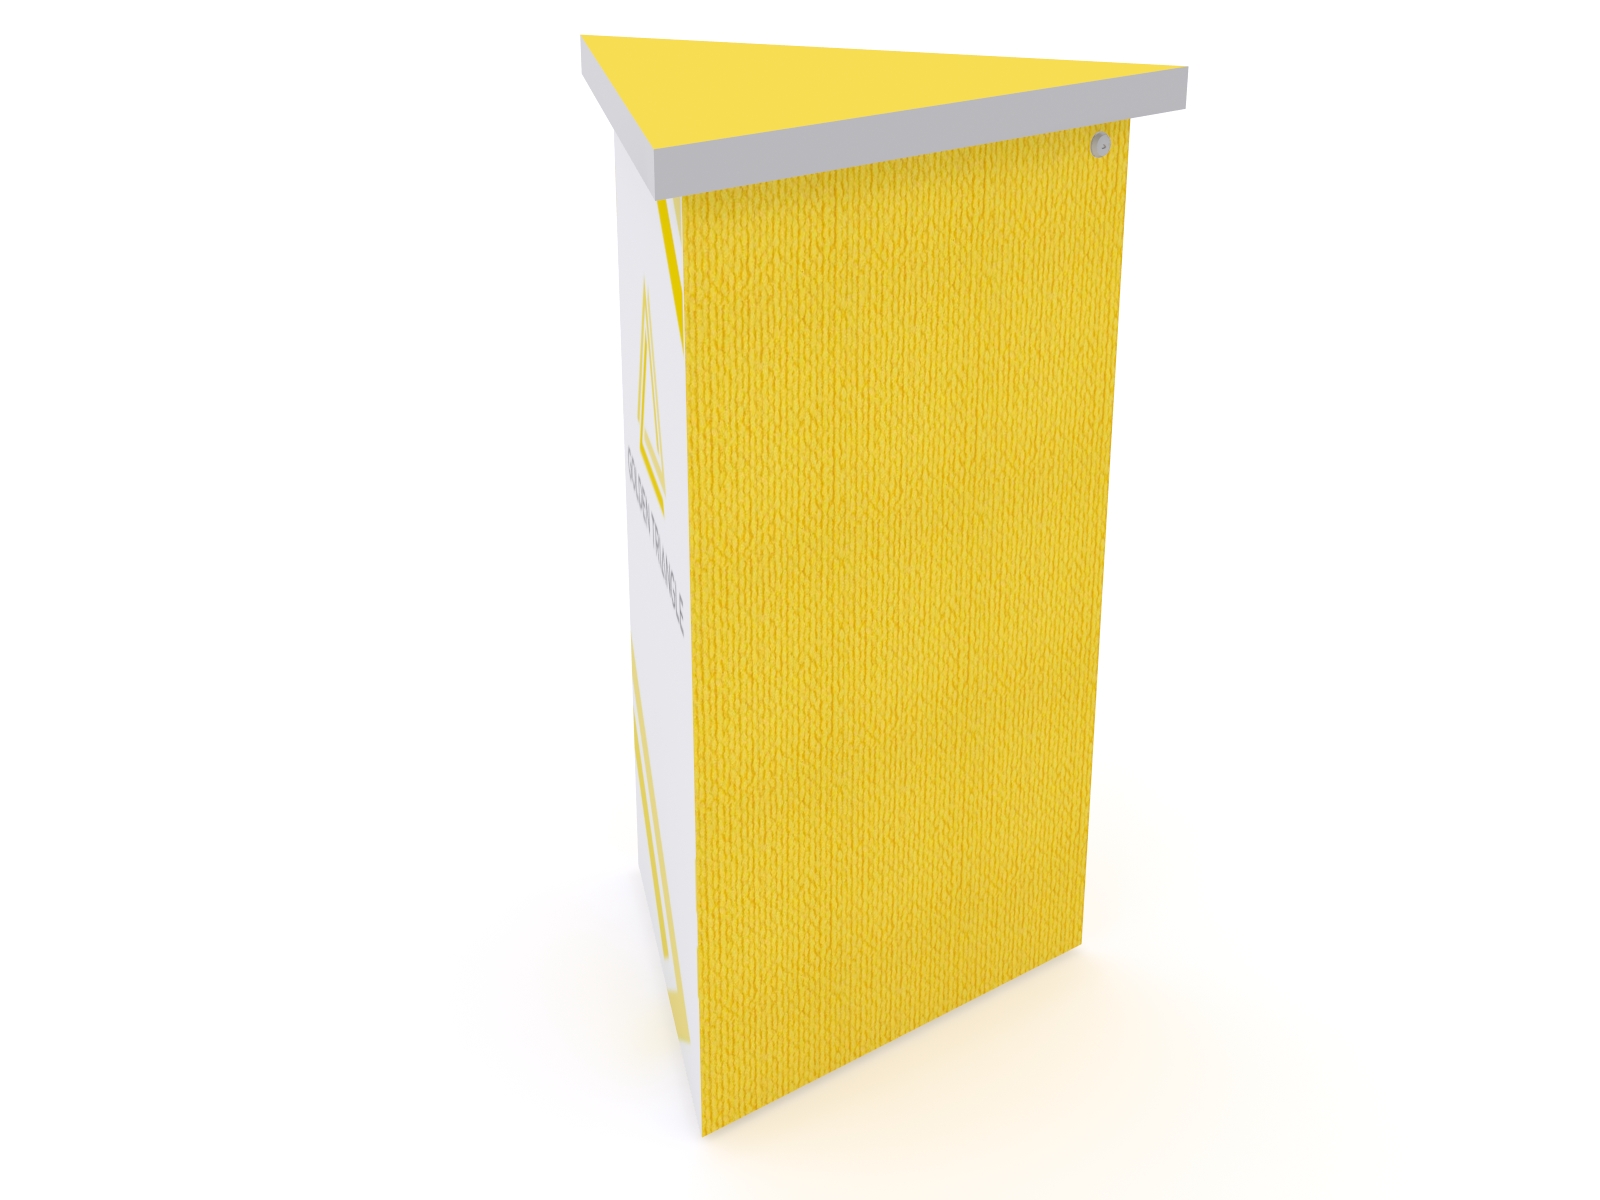 DI-638 Trade Show Pedestal -- Folding Fabric Panels -- Full Graphic (velcro-attached)